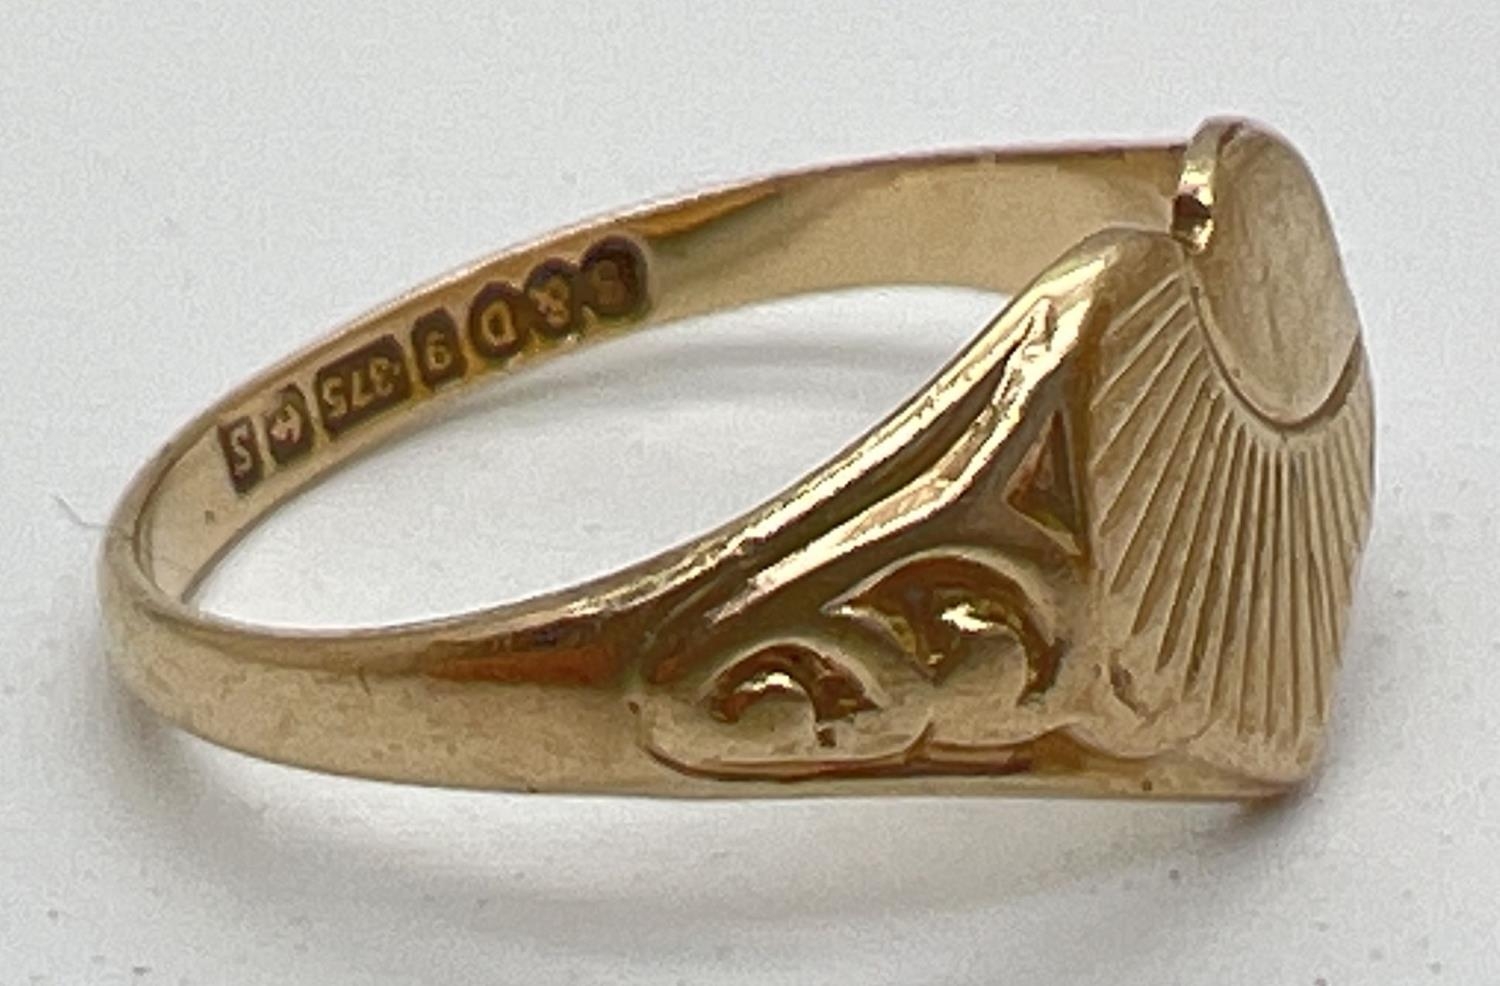 A vintage 9ct gold heart shaped signet ring with sun-ray decoration and small empty cartouche. - Image 2 of 3